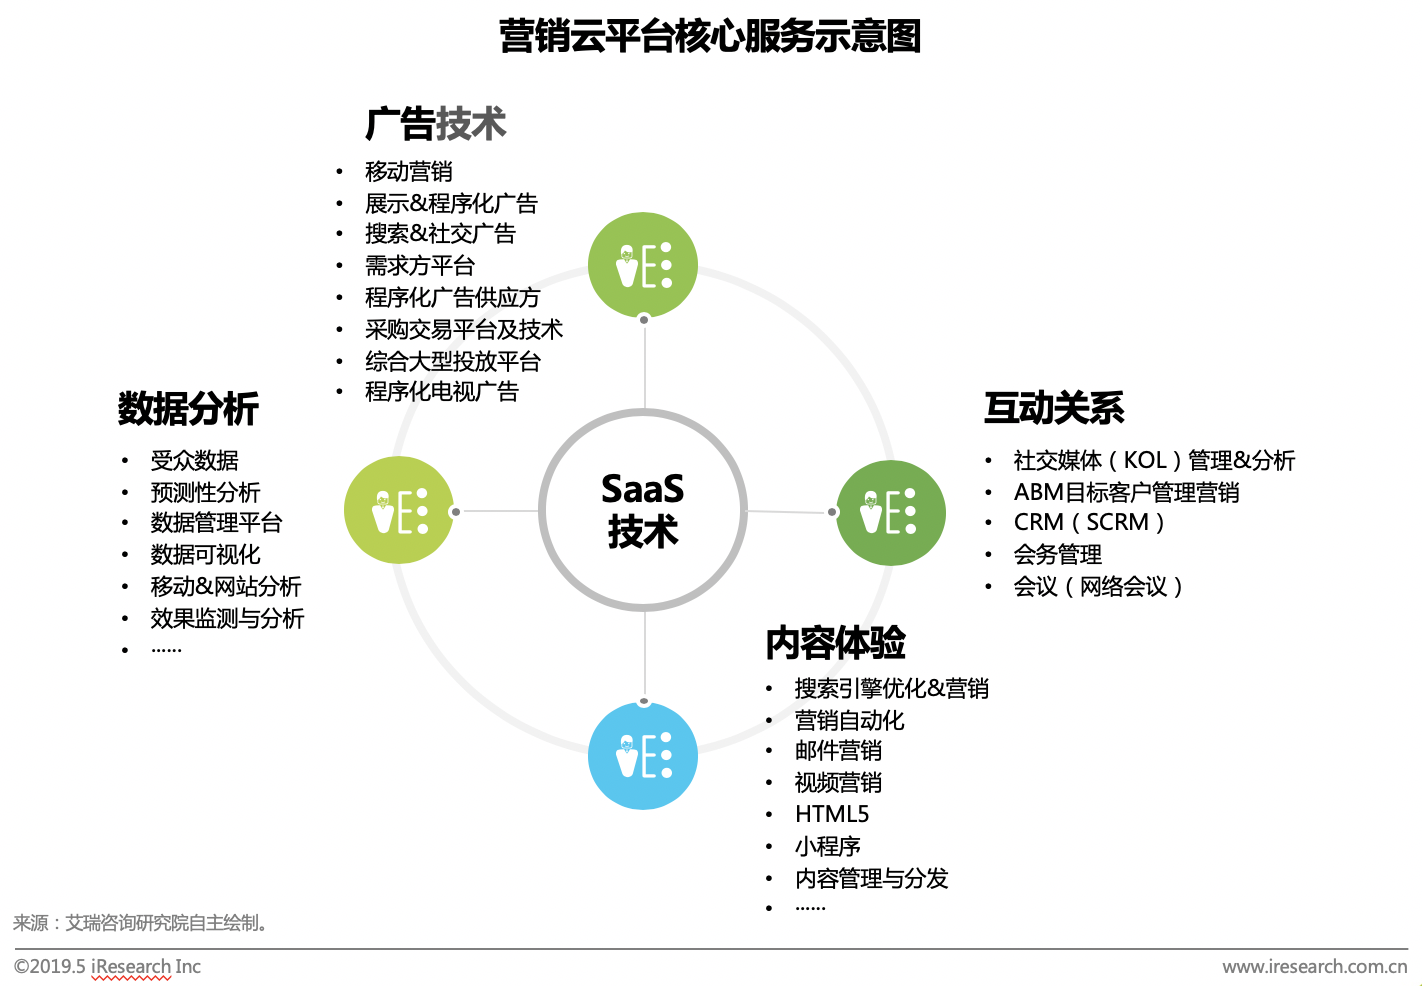 Cross border information iResearch marketing tracking: does China's marketing cloud platform meet the sea organically?